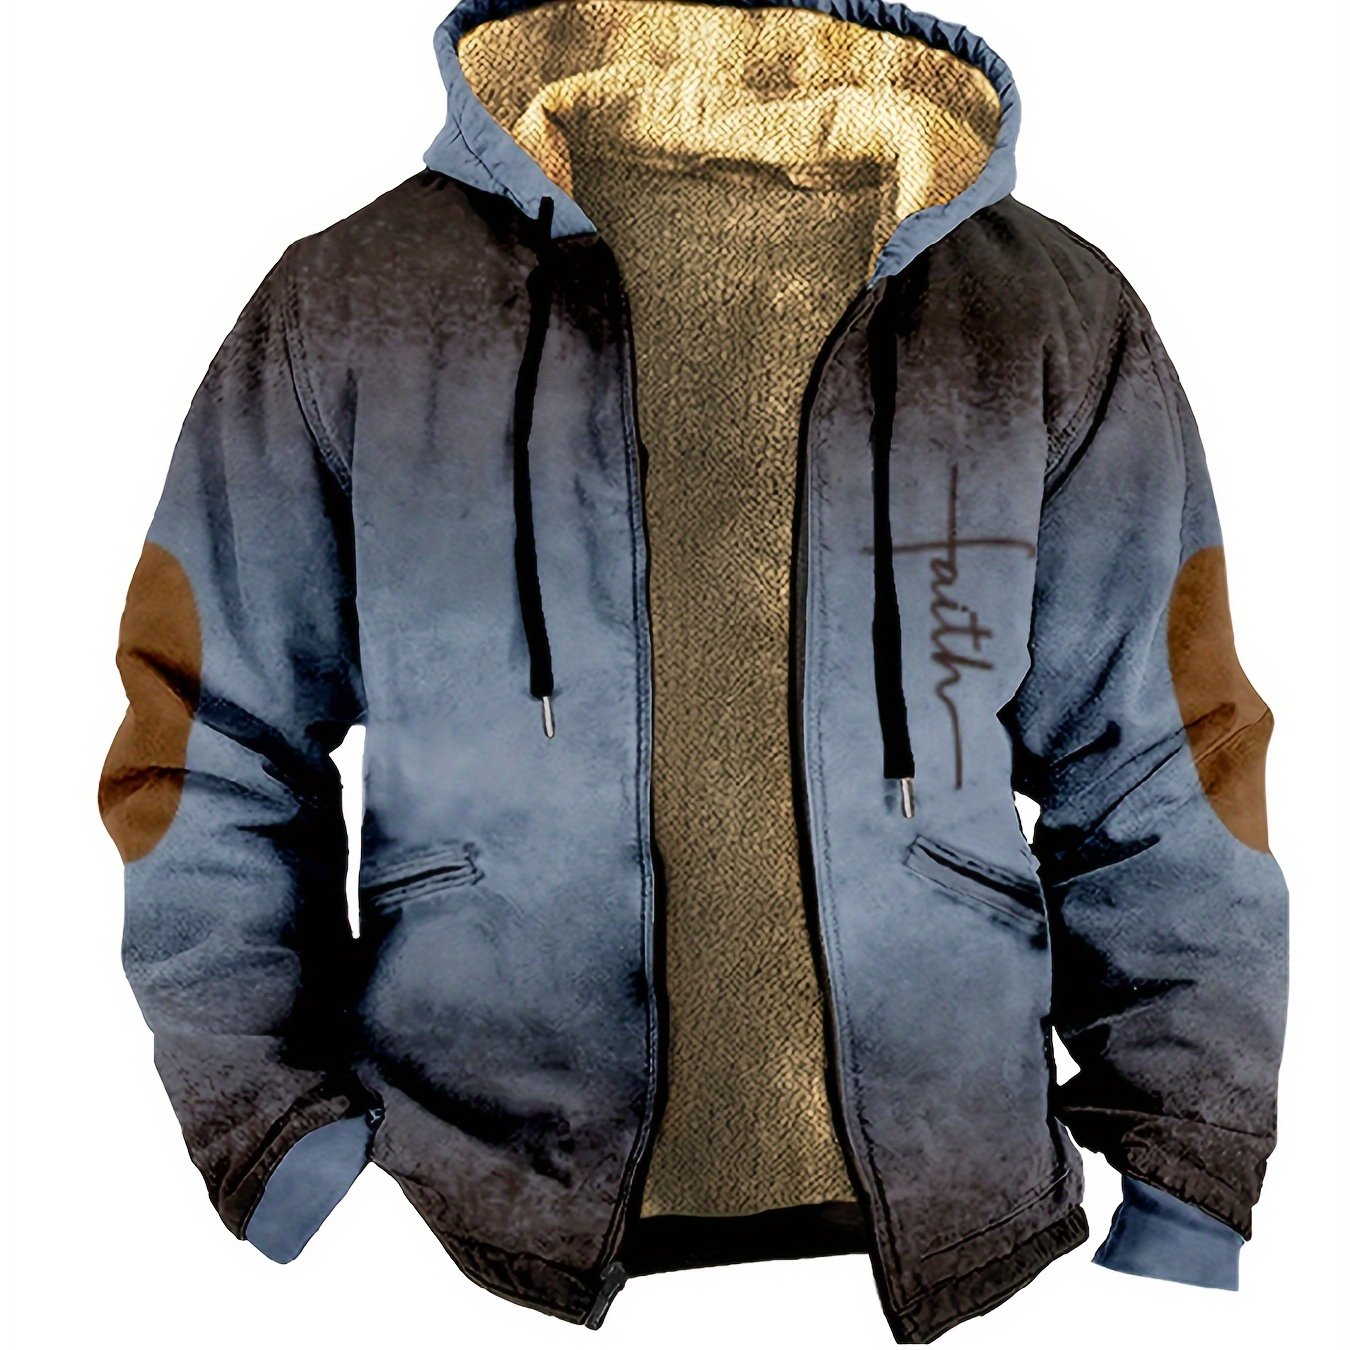 Ethnic Style Warm Fleece Hooded Jacket, Men's Casual Warm Thick Zip Up  Hoodie For Fall Winter